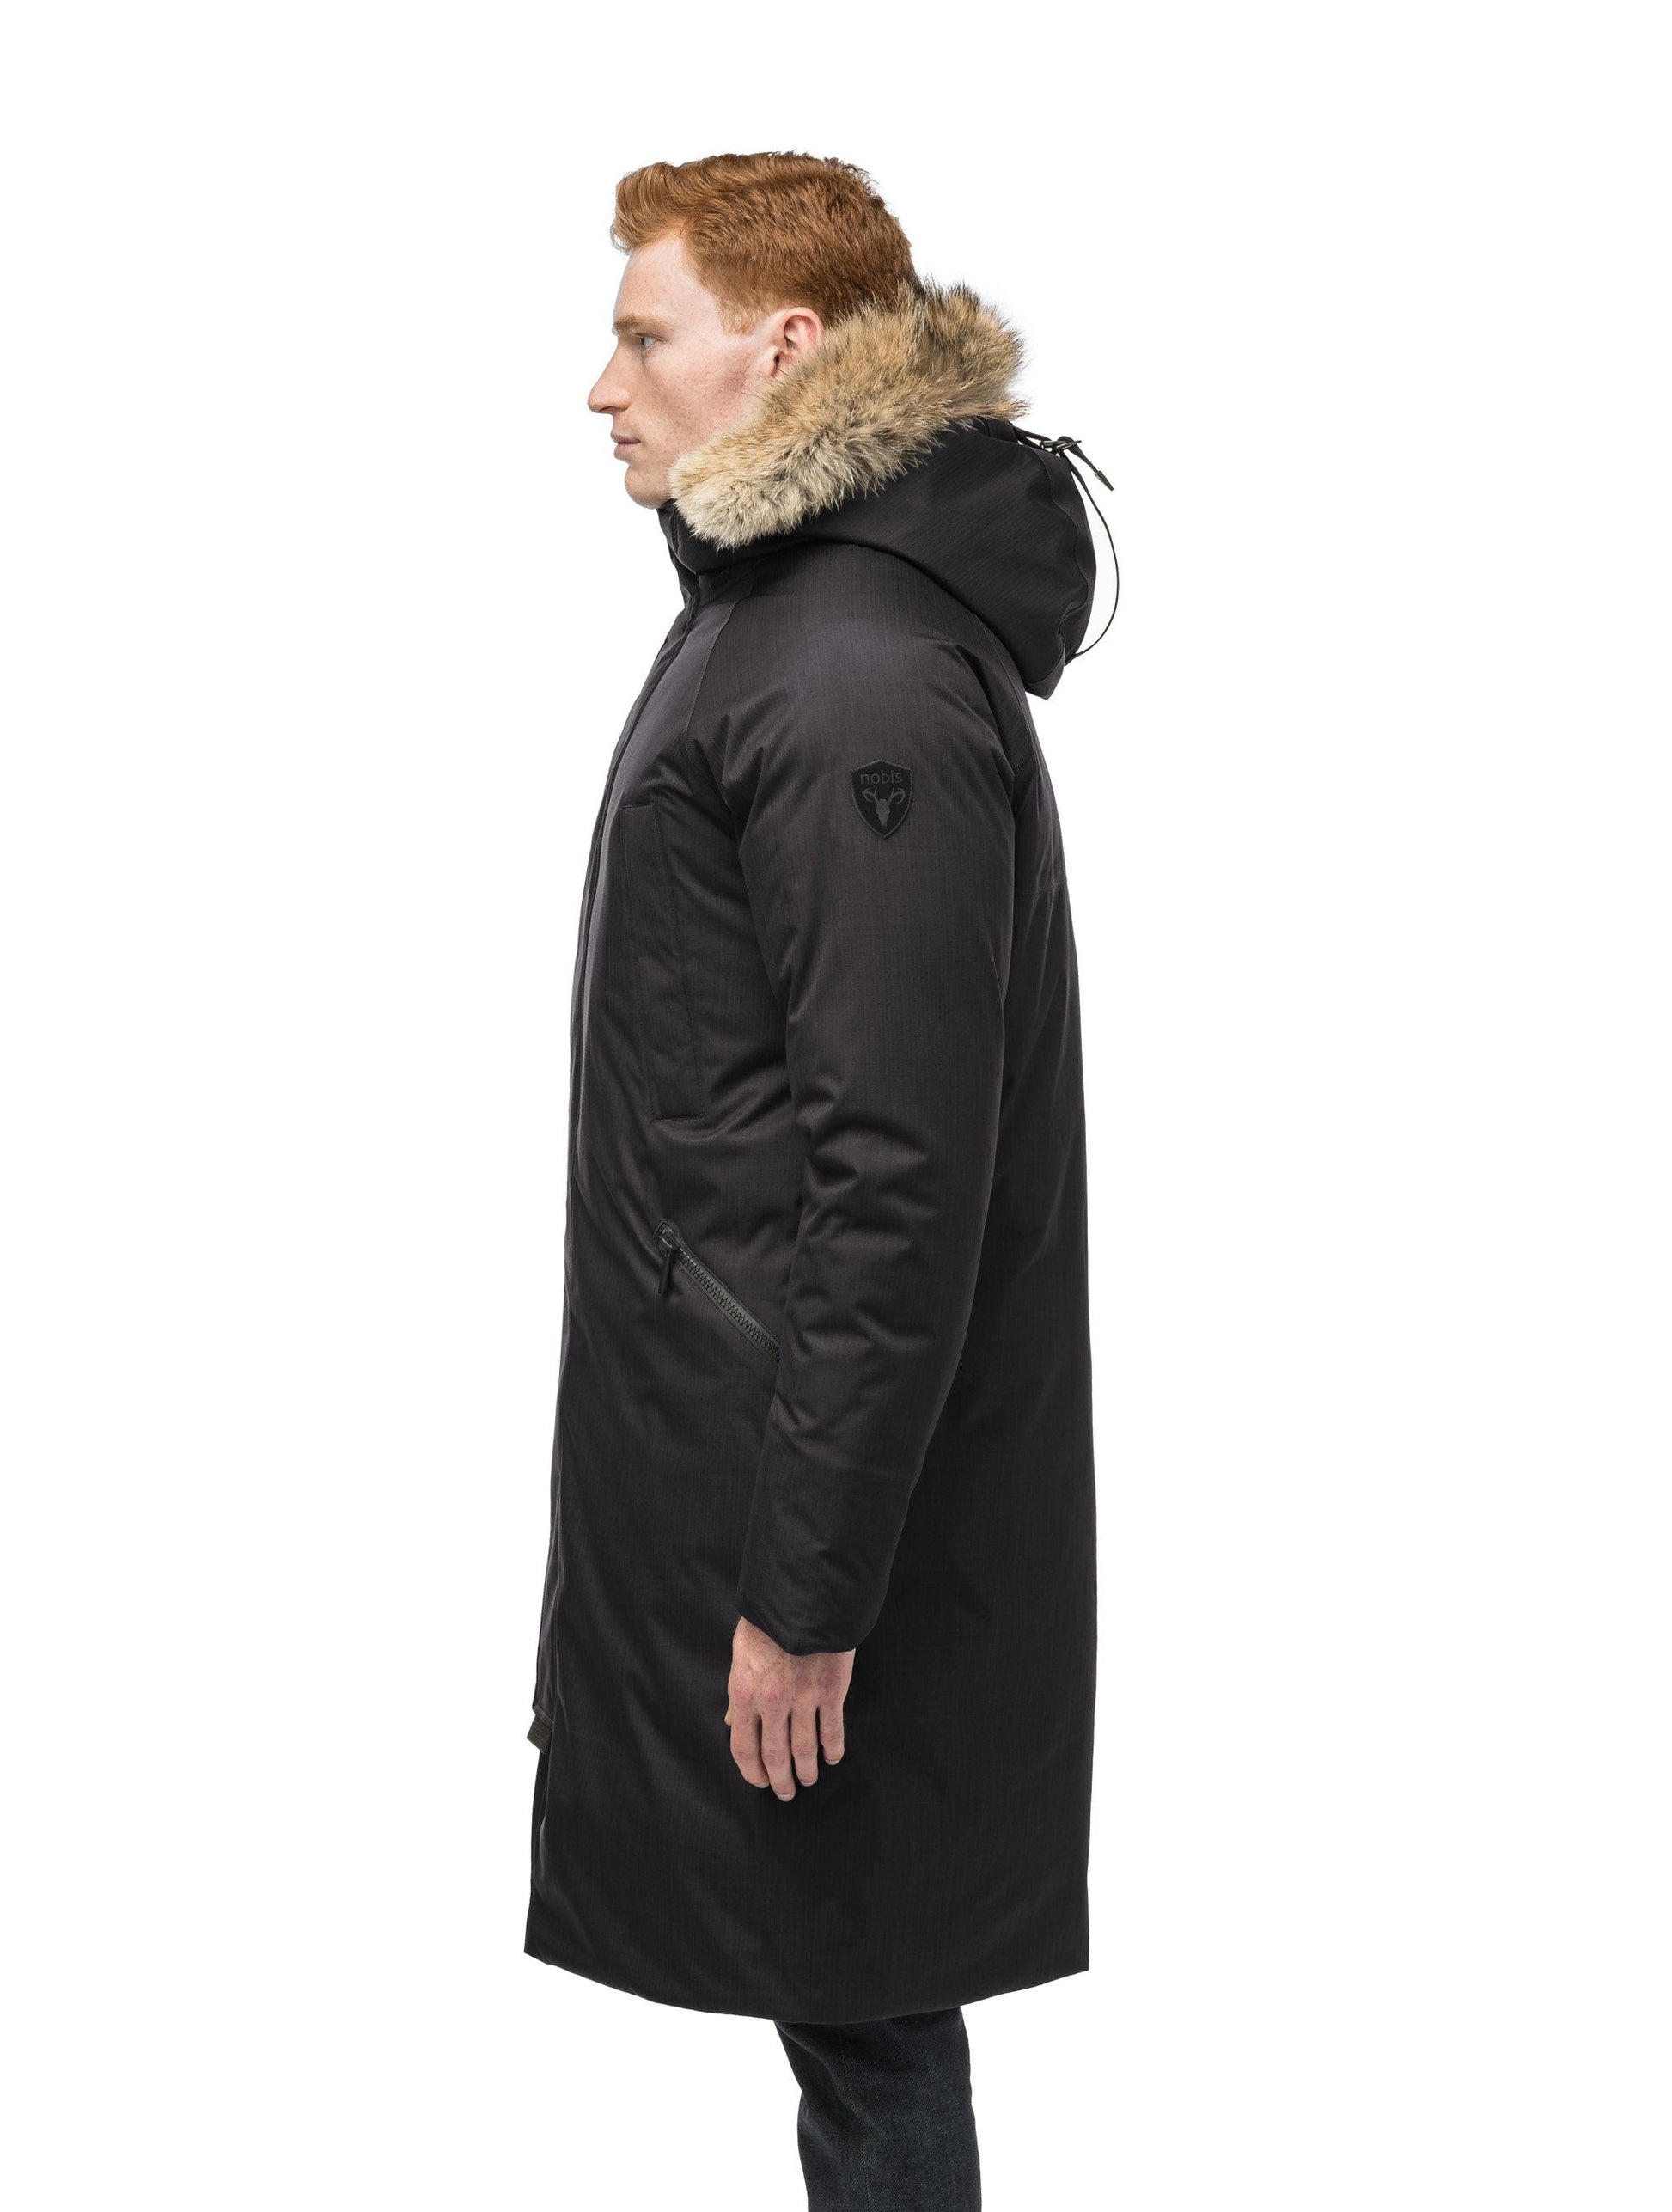 This ankle length men's down filled parka doubles as an over coat with a removable fur trim on the hood in Black